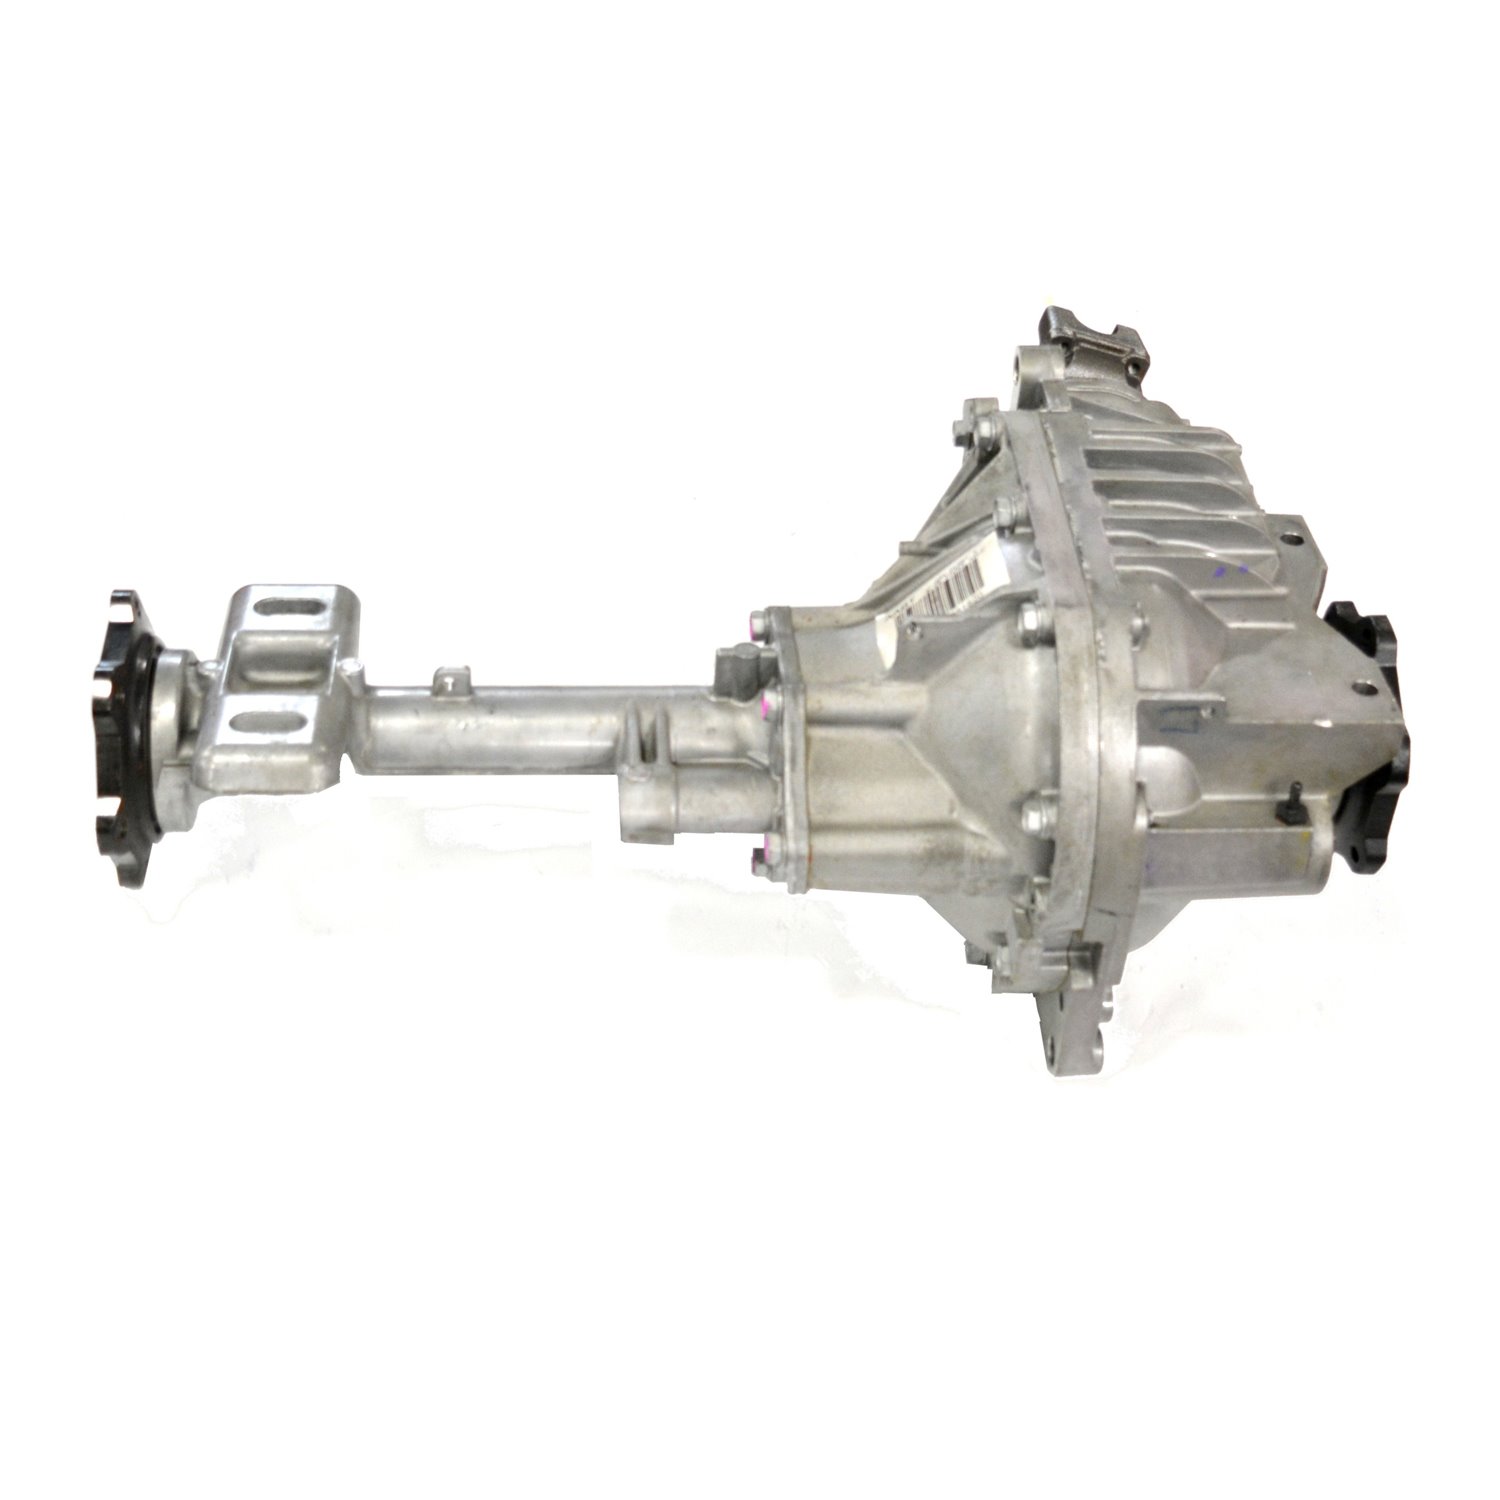 RAA440-1477X Front Axle Assembly, Chrysler 8.25 IFS, '13-'19 GM 1500 Pickup ('19 Classic) & '13-'20 Suv, 3.42 Ratio, Open